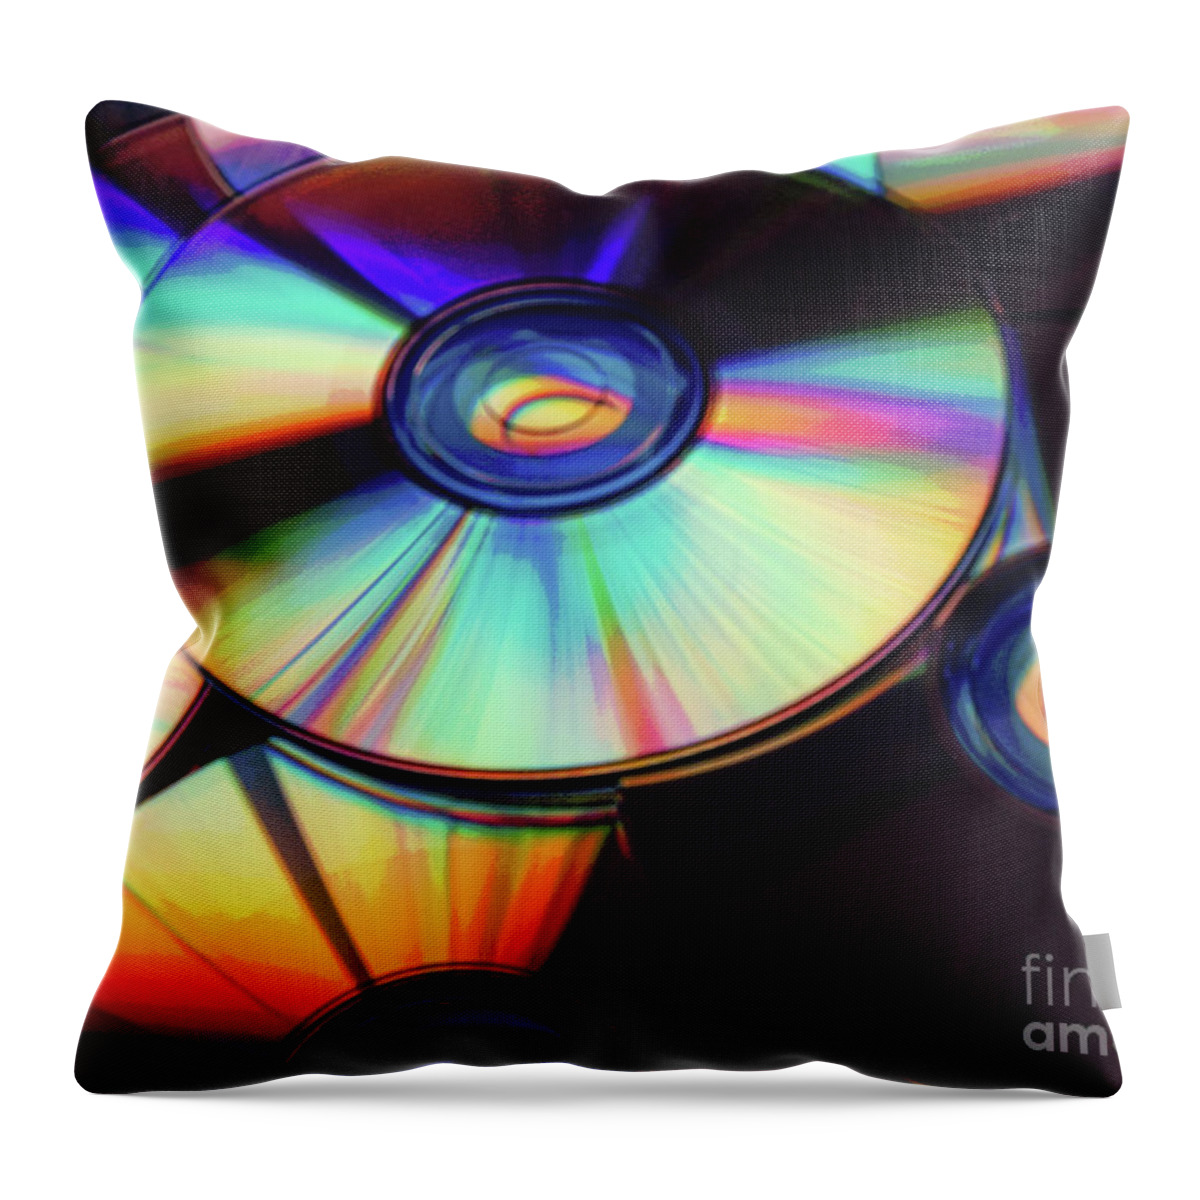 Compact Disks Throw Pillow featuring the digital art Compact Disks by Phil Perkins